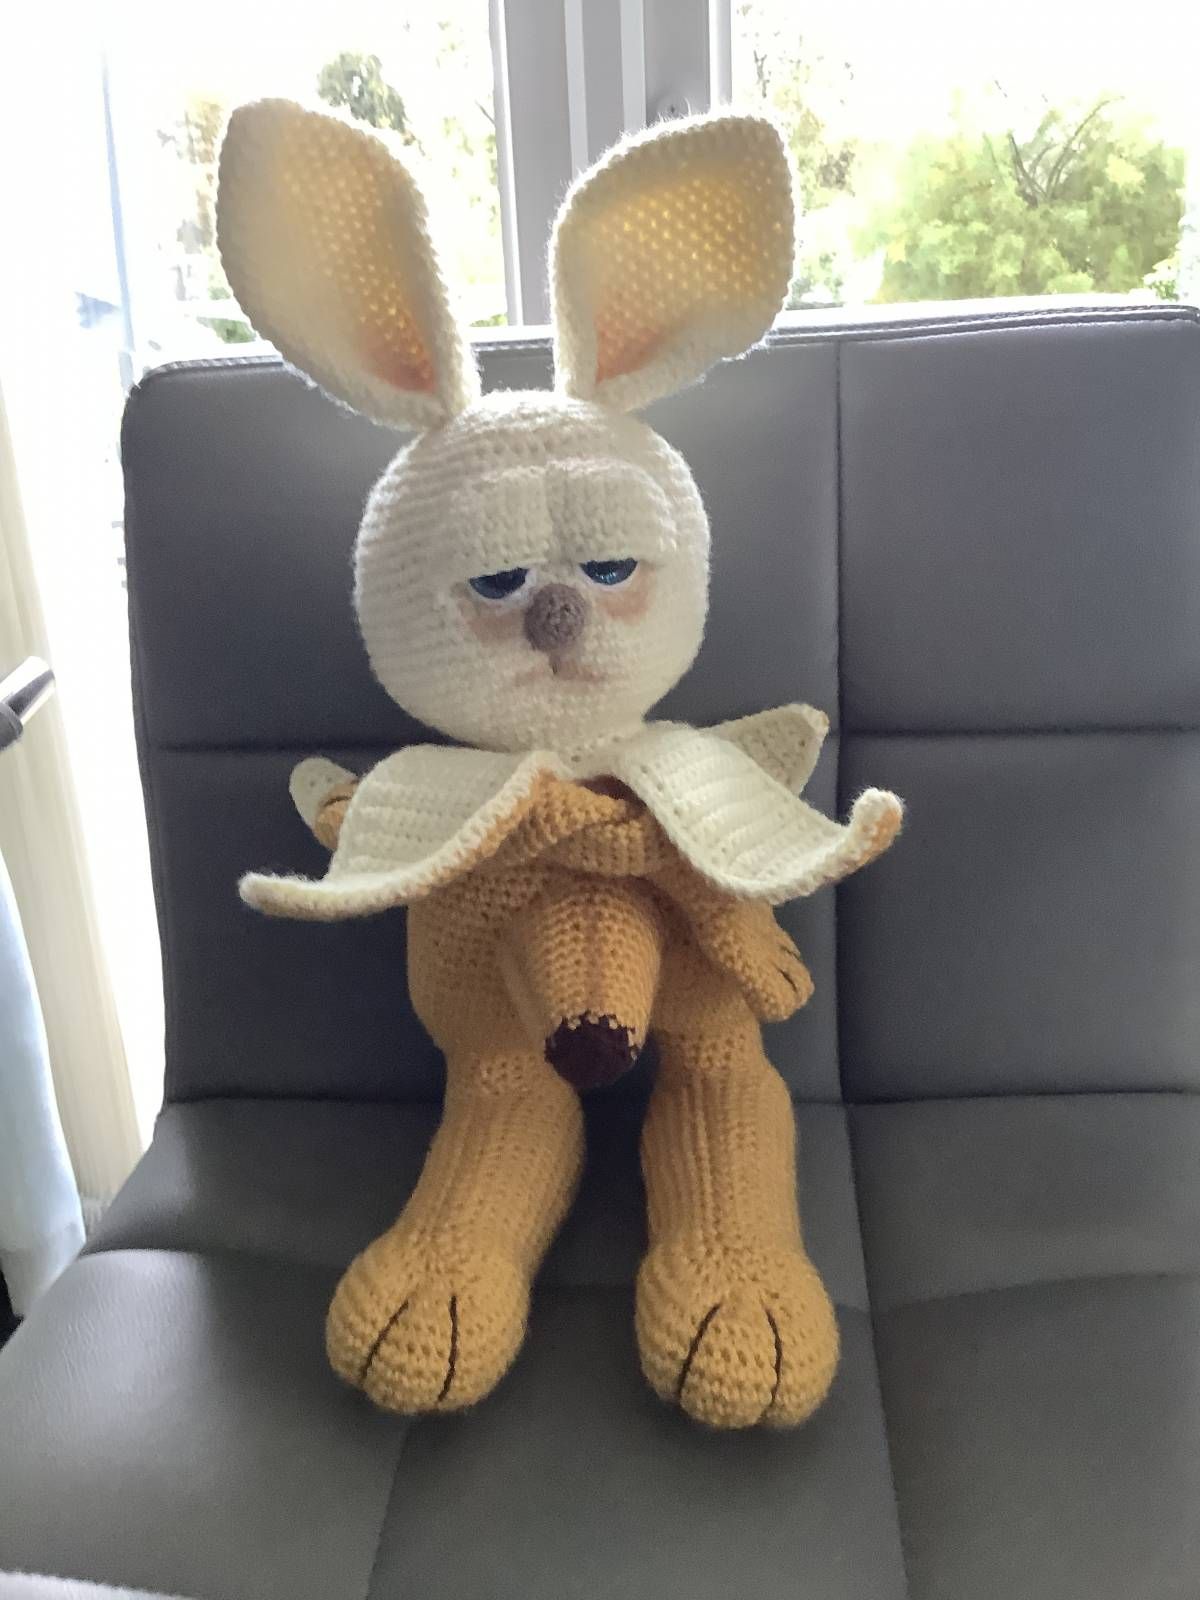 Amigurumi Doll Bunny Rabbit Crochet Pattern Review by Carole Morley for Cottontail Whiskers